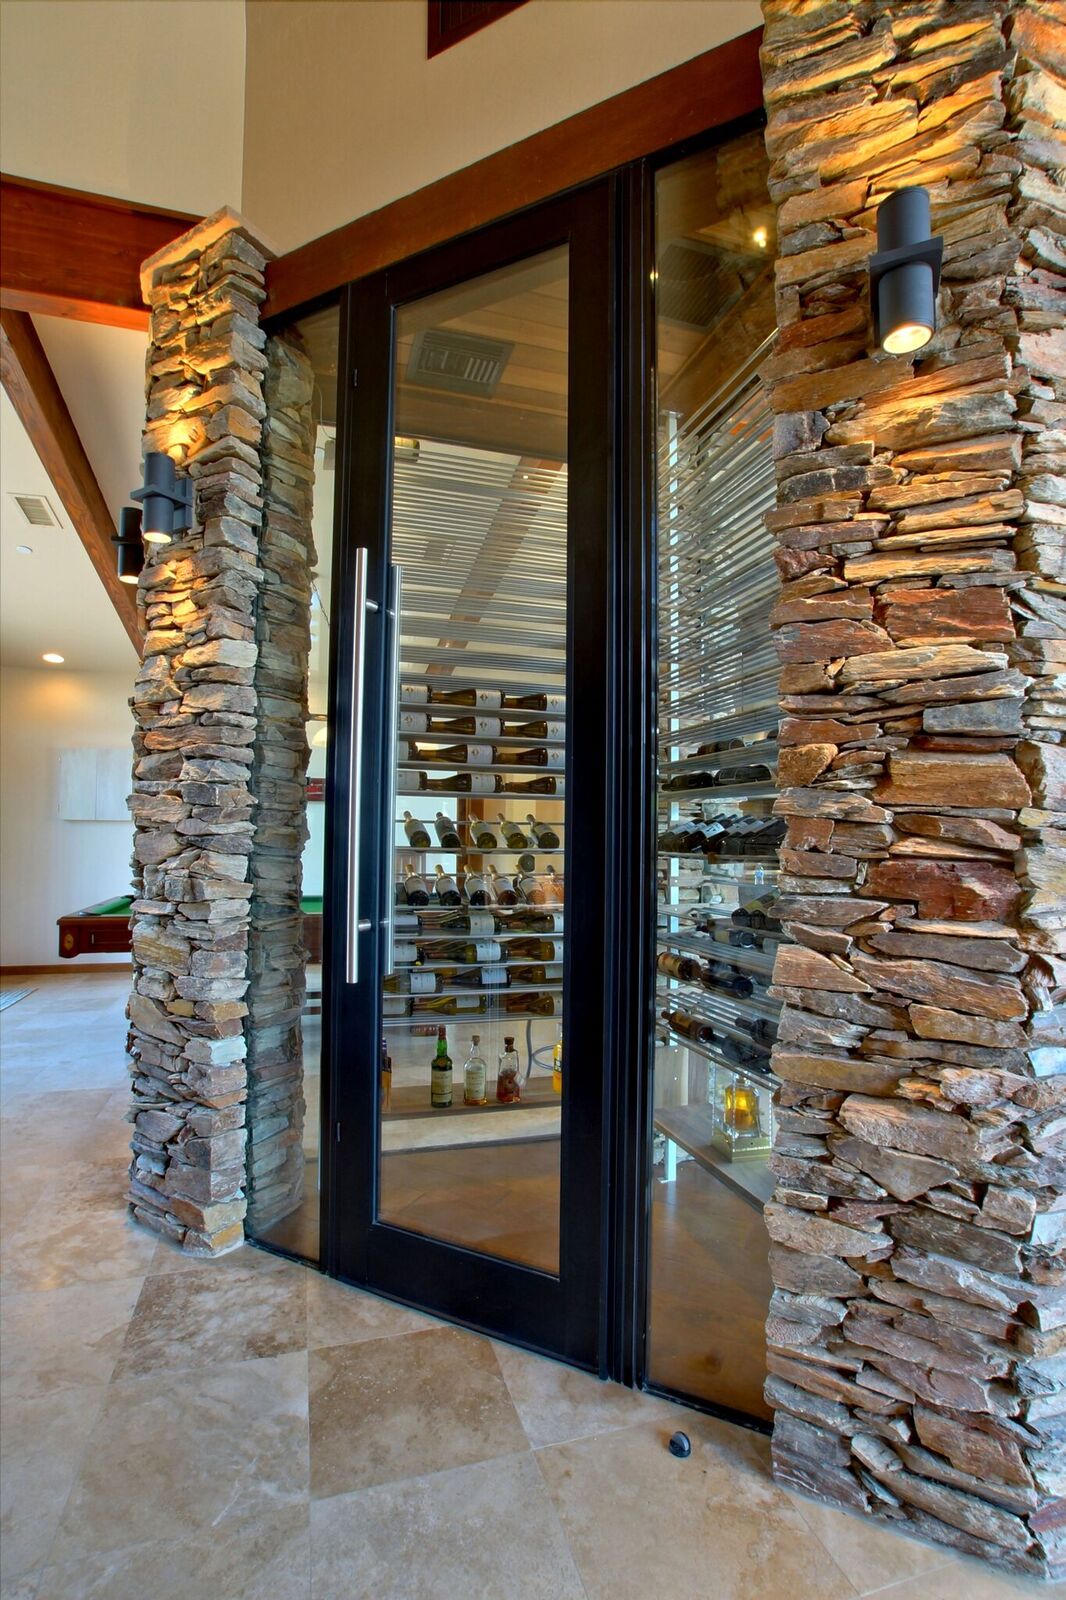 A glass door with a stone wall in the background.